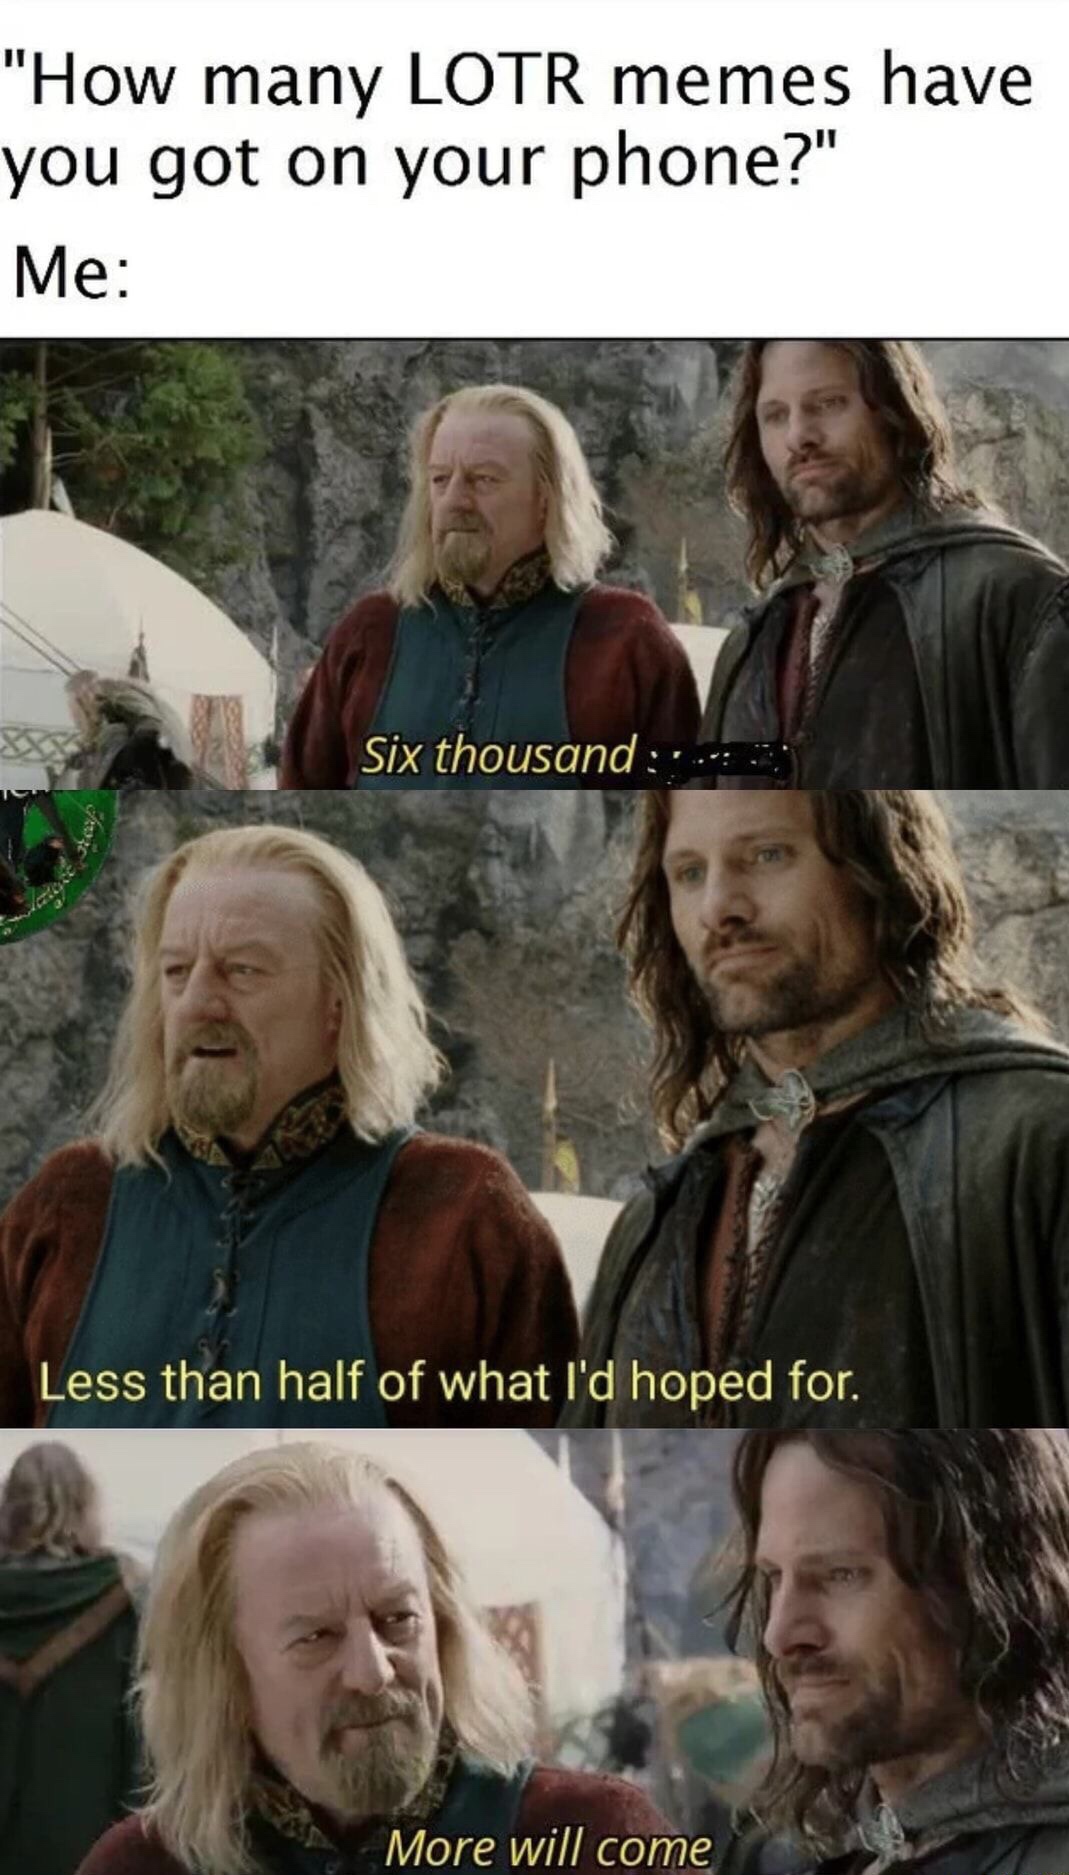 lotr memes - "How many Lotr memes have you got on your phone?" Me Six thousand... Less than half of what I'd hoped for. More will come